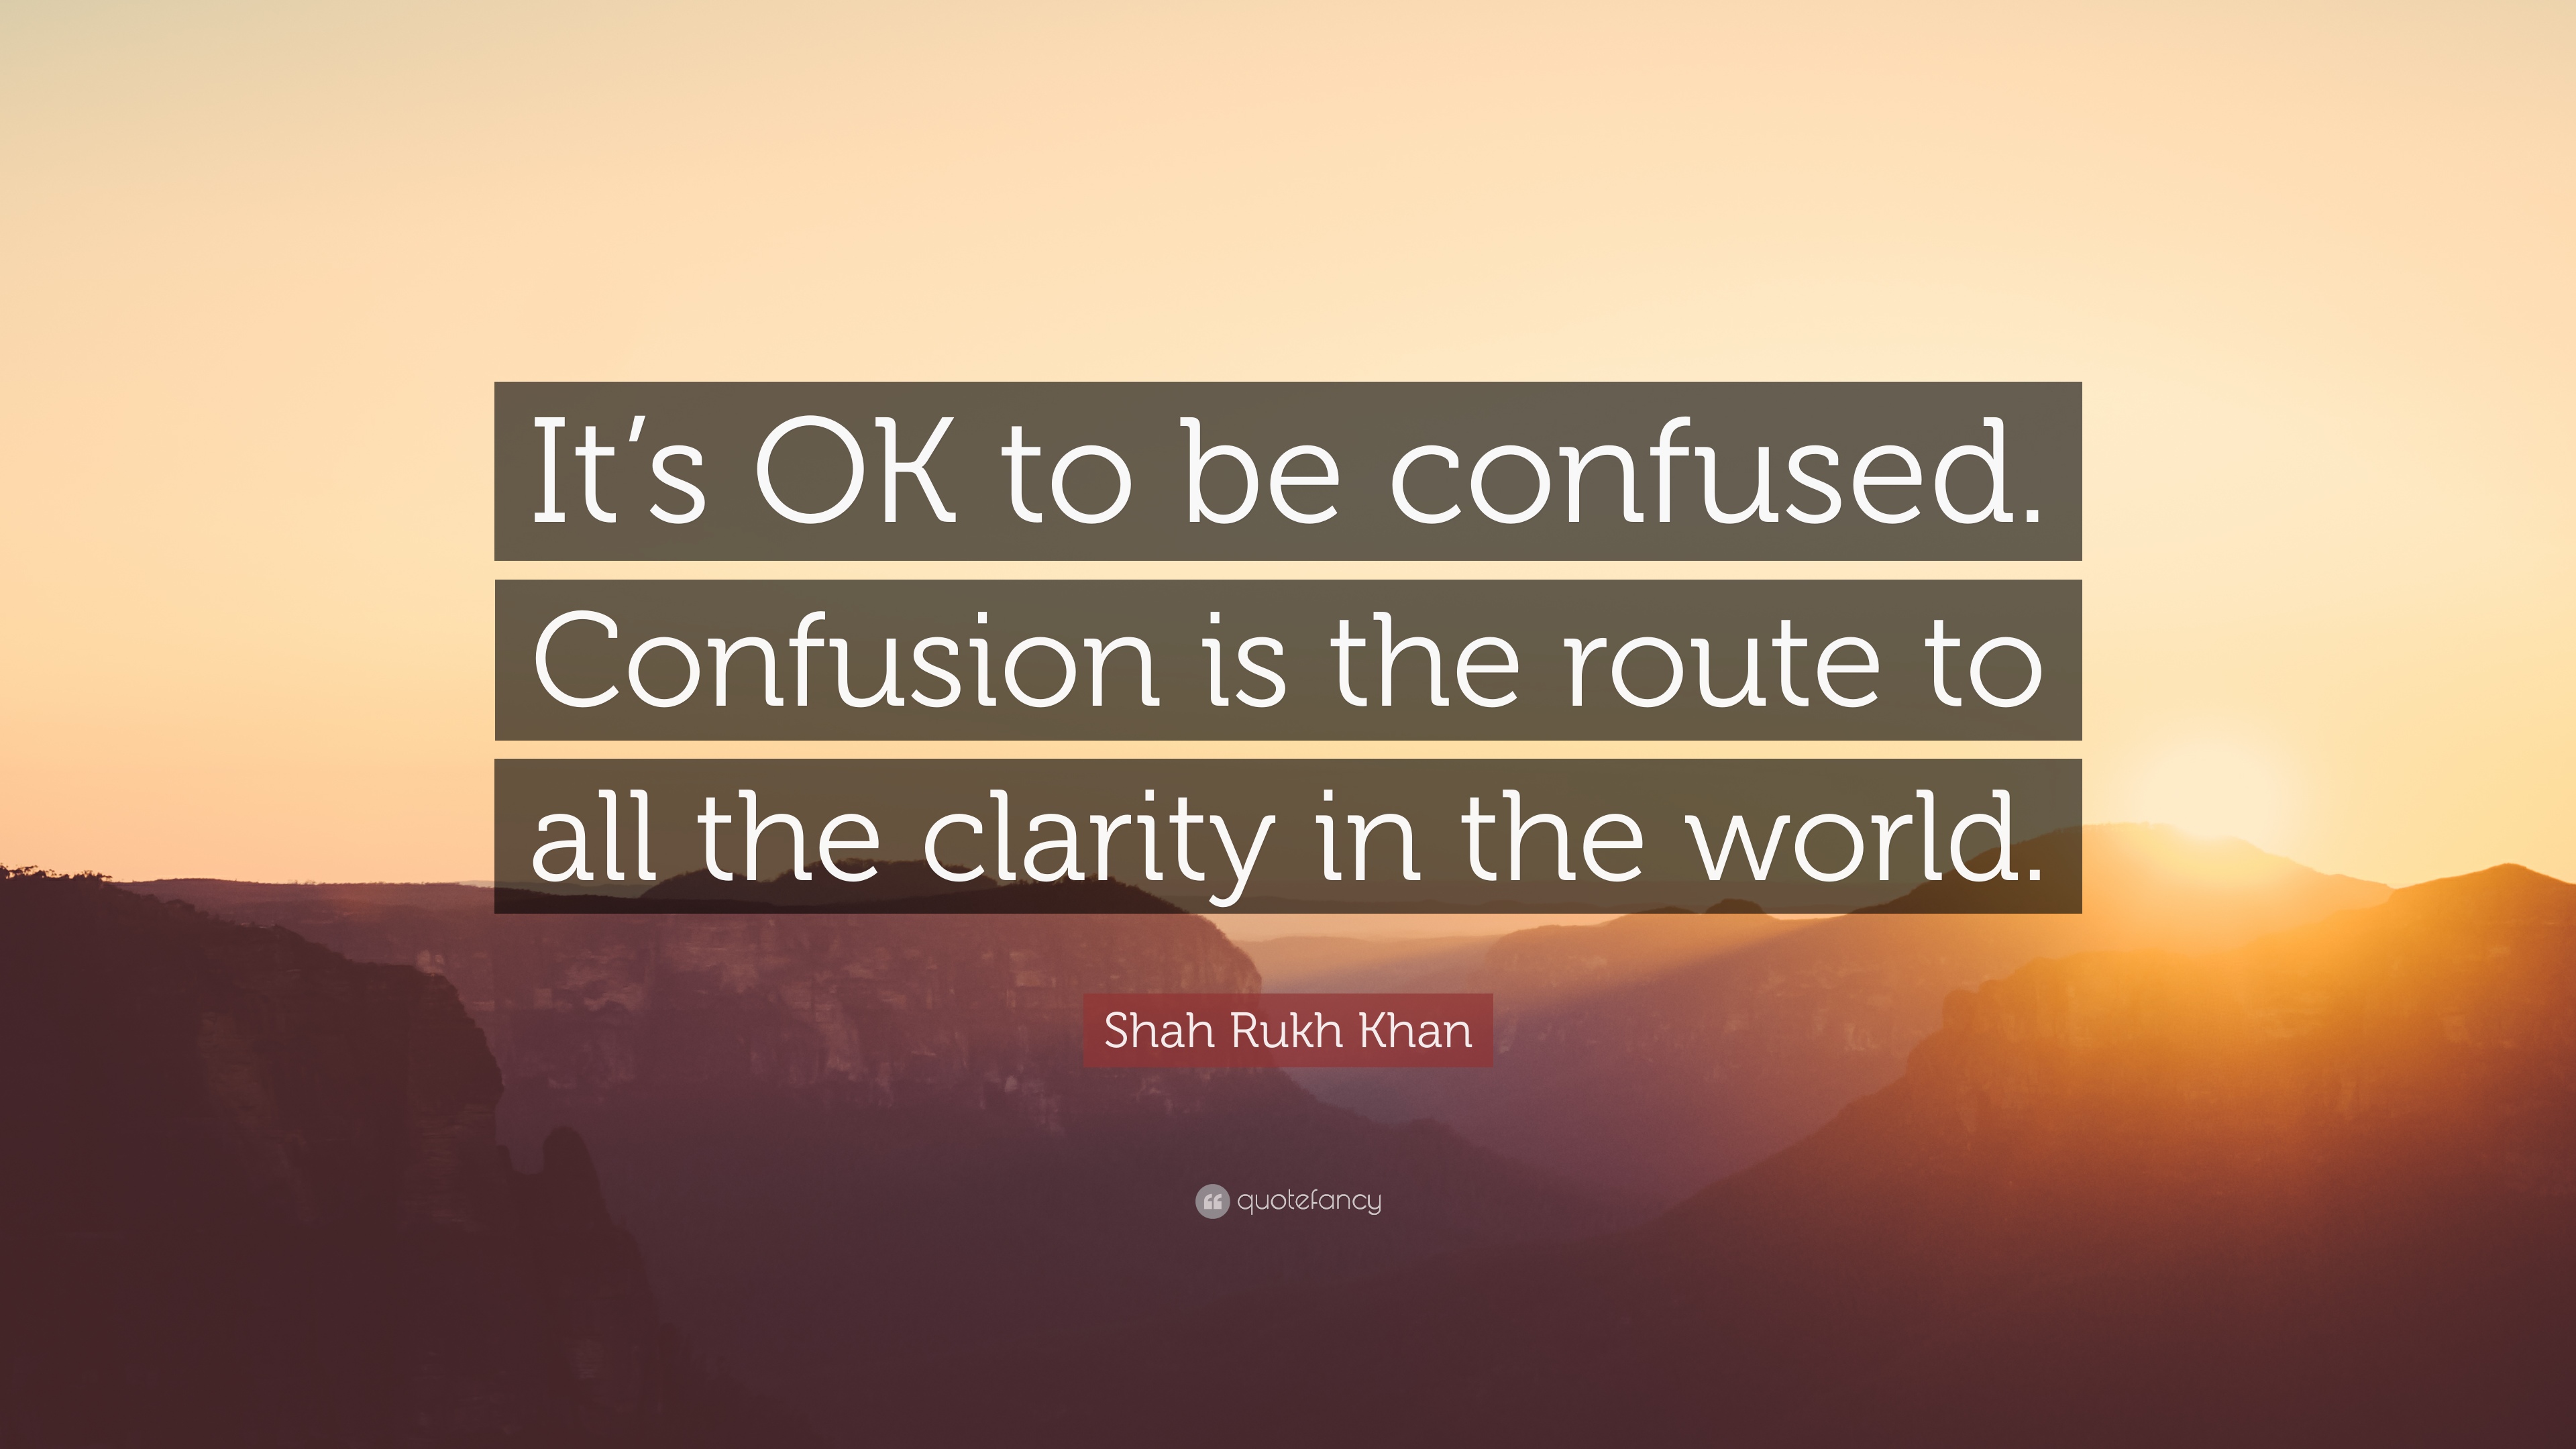 672279-Shah-Rukh-Khan-Quote-It-s-OK-to-be-confused-Confusion-is-the-route.jpg